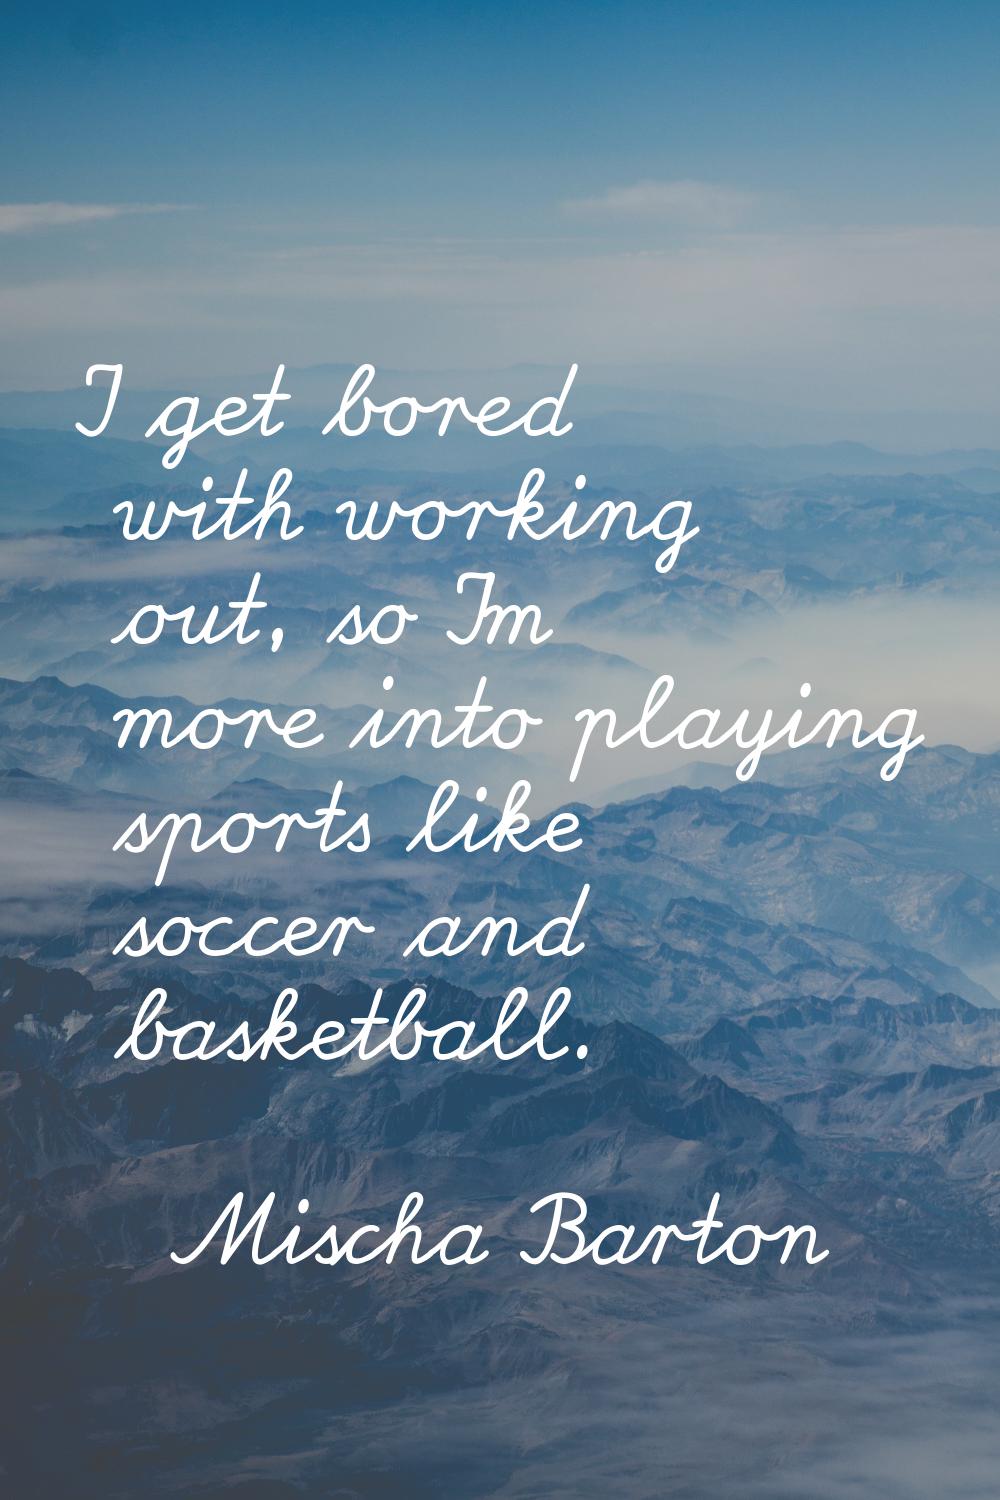 I get bored with working out, so I'm more into playing sports like soccer and basketball.